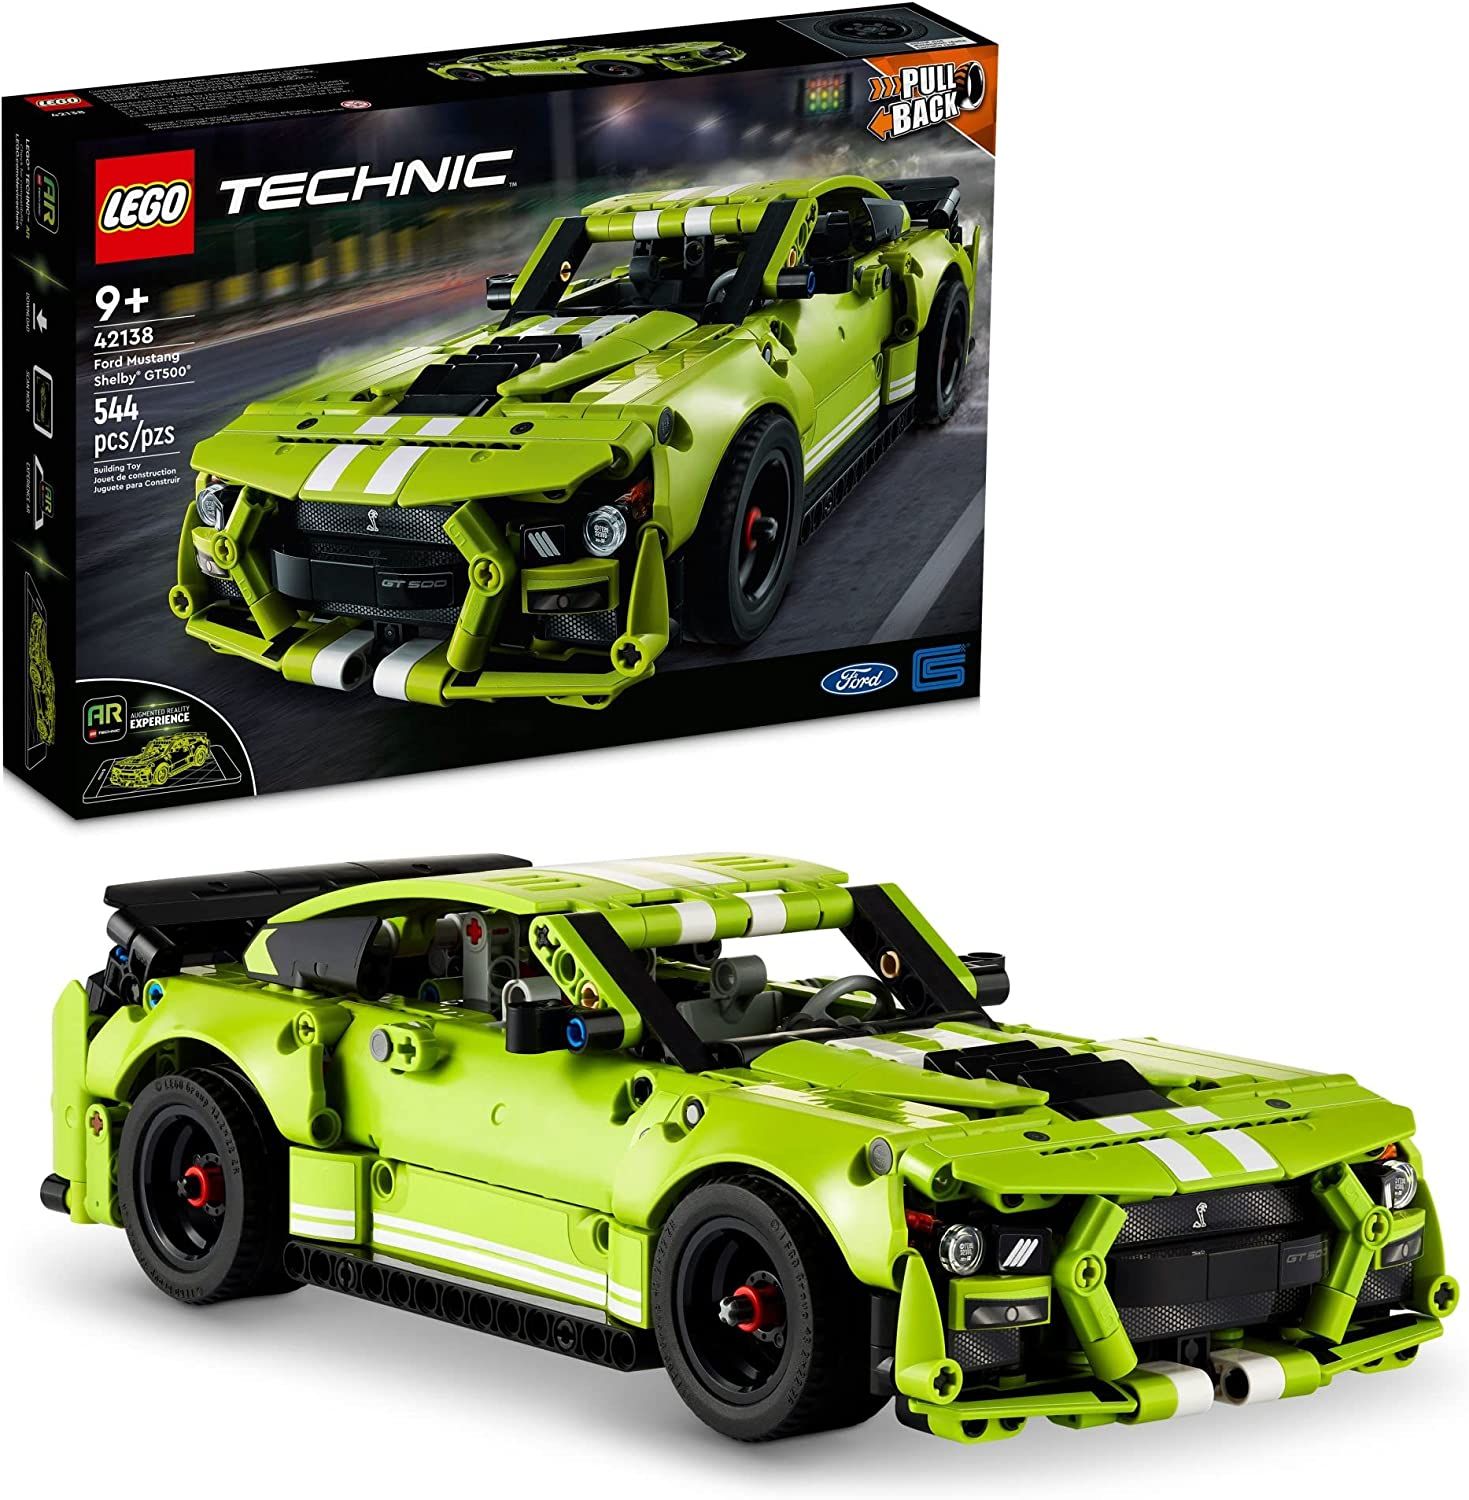 LEGO Technic Ford Mustang Shelby GT500 42138 Building Toy Set (544 Pieces) 1